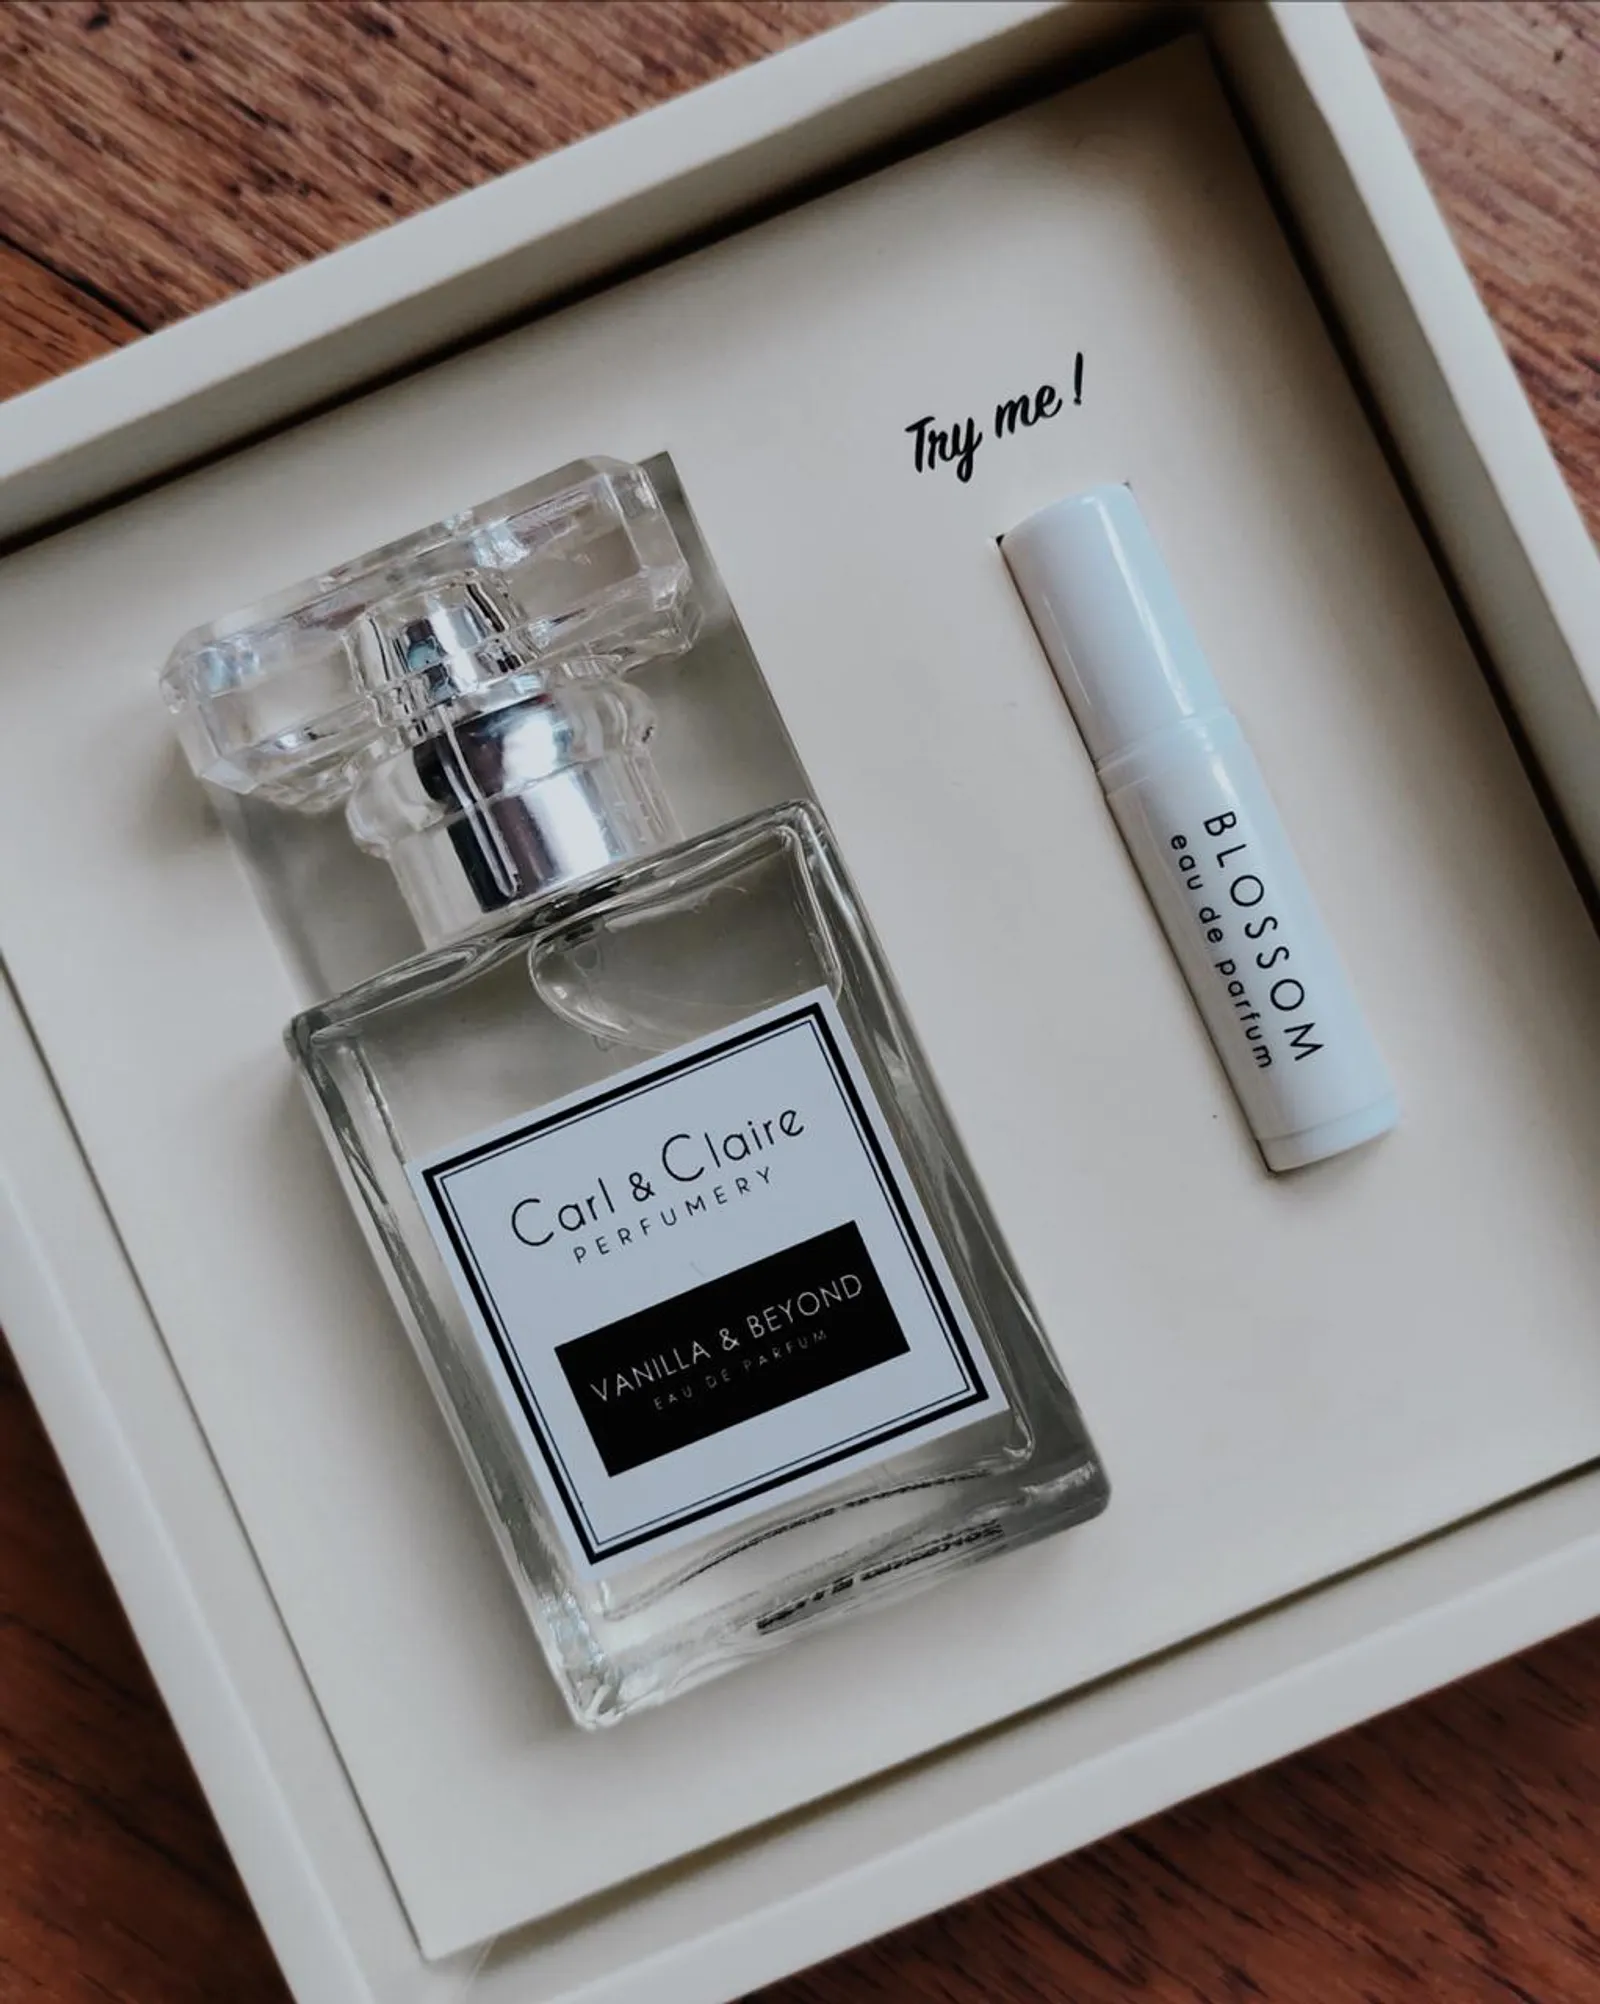 Review: Carl & Claire Vanilla and Beyond